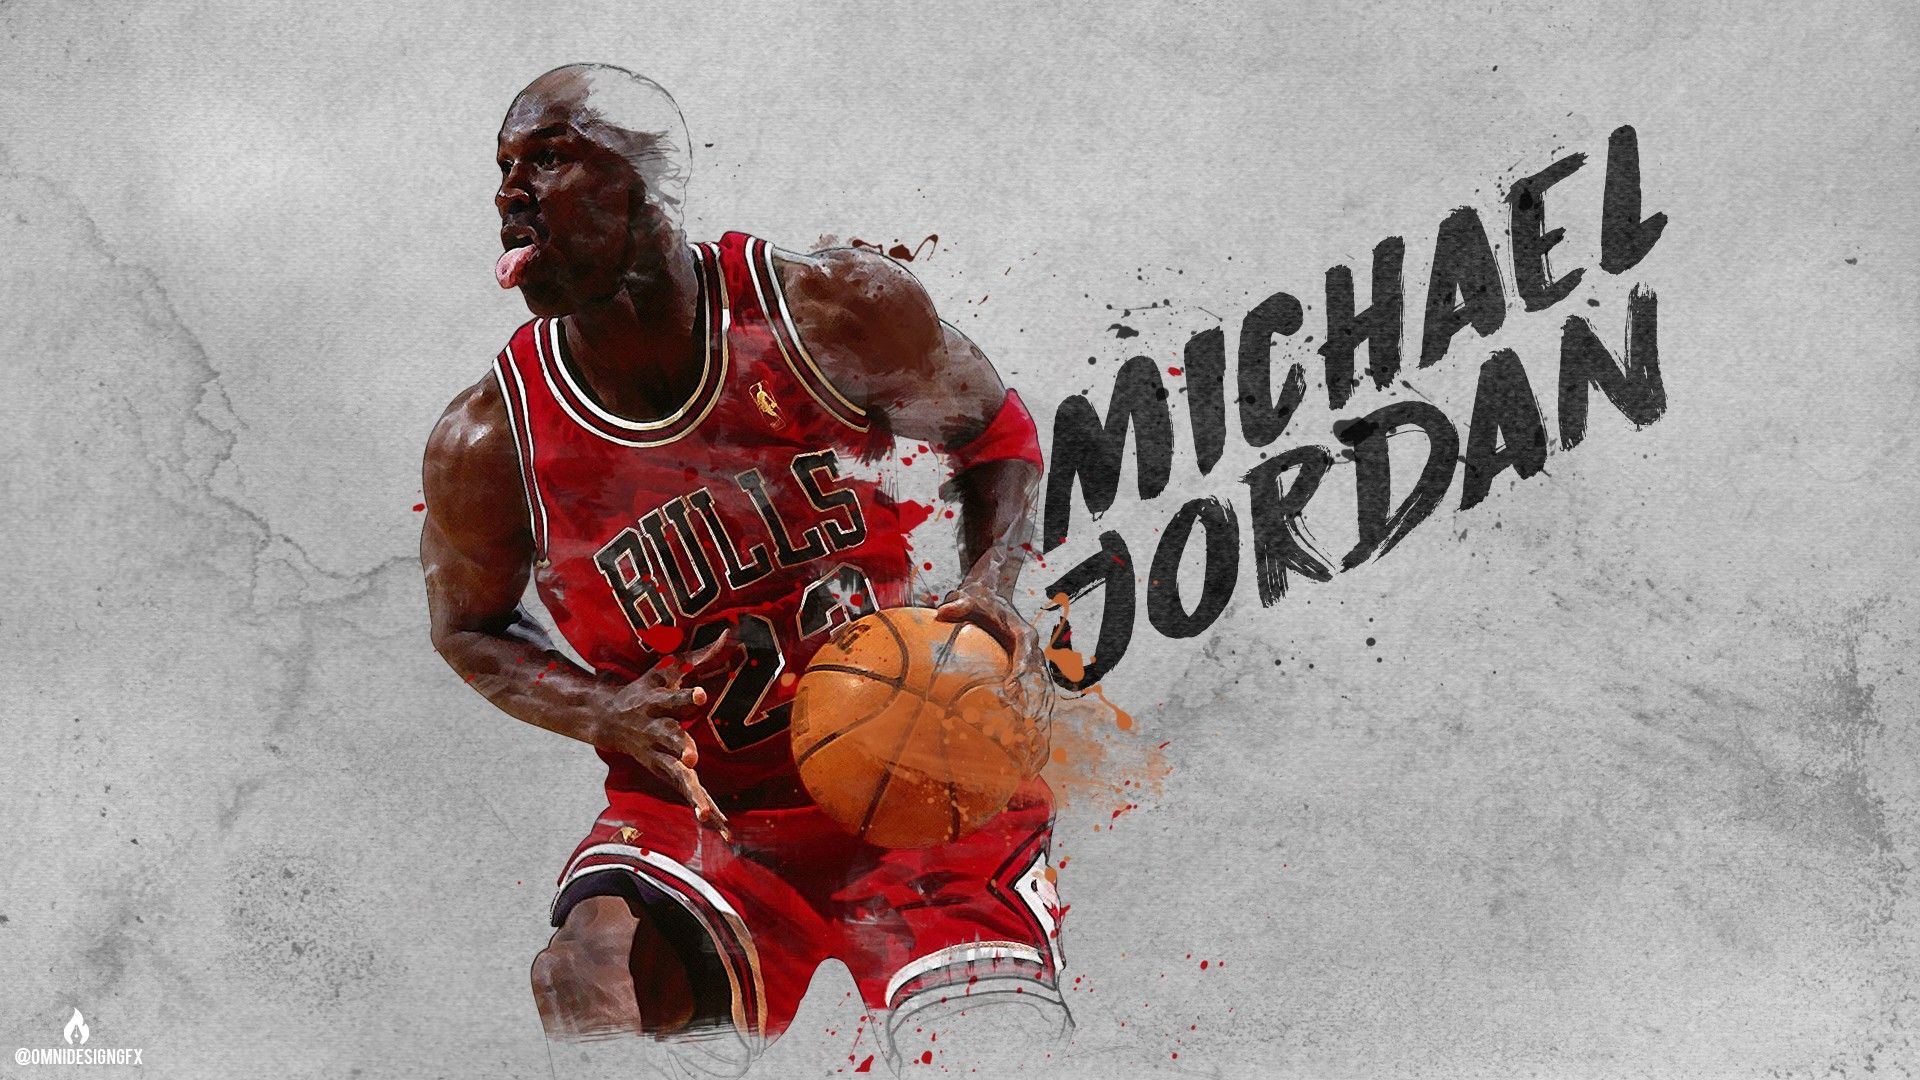 Michael Jordan wallpaper for desktop and mobiles. This wallpaper is in high definition and available in wide range of sizes and resolutions. - Michael Jordan